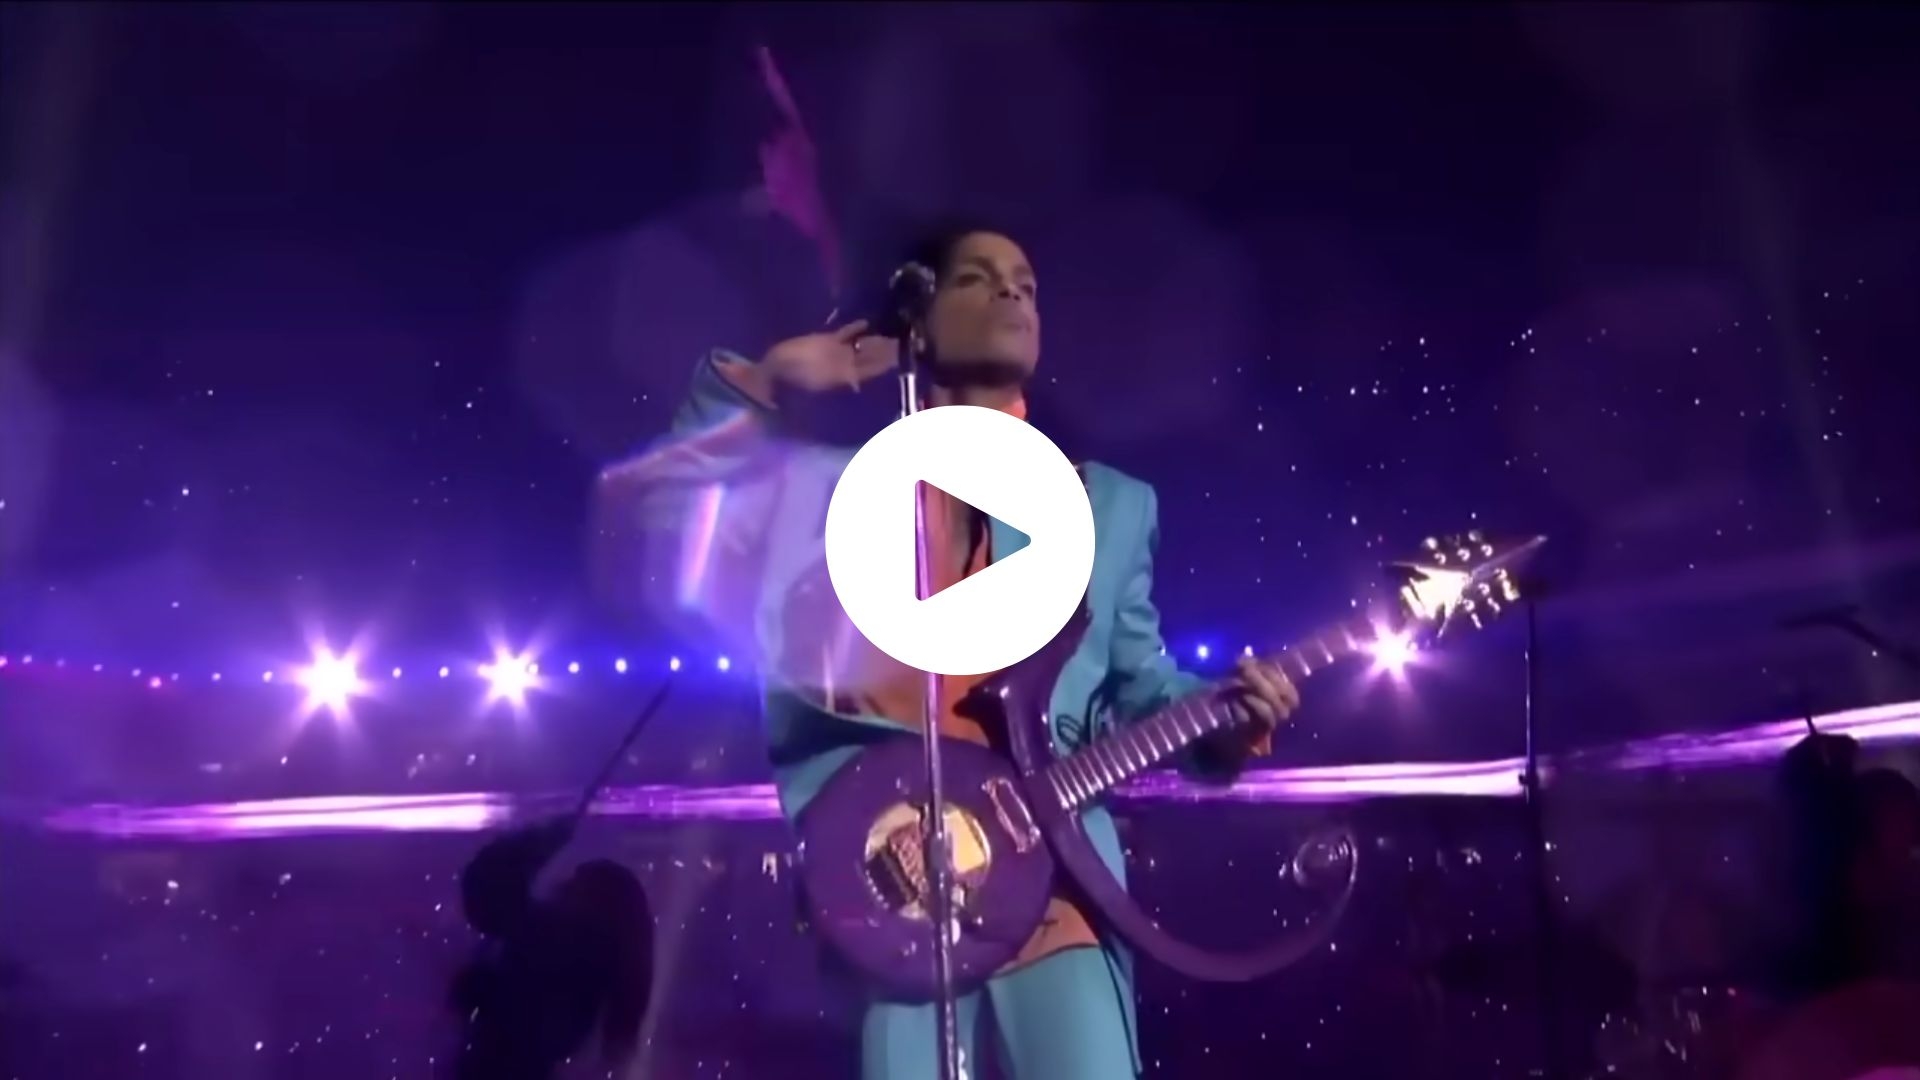 Prince performing on stage at the 2007 Super Bowl halftime show